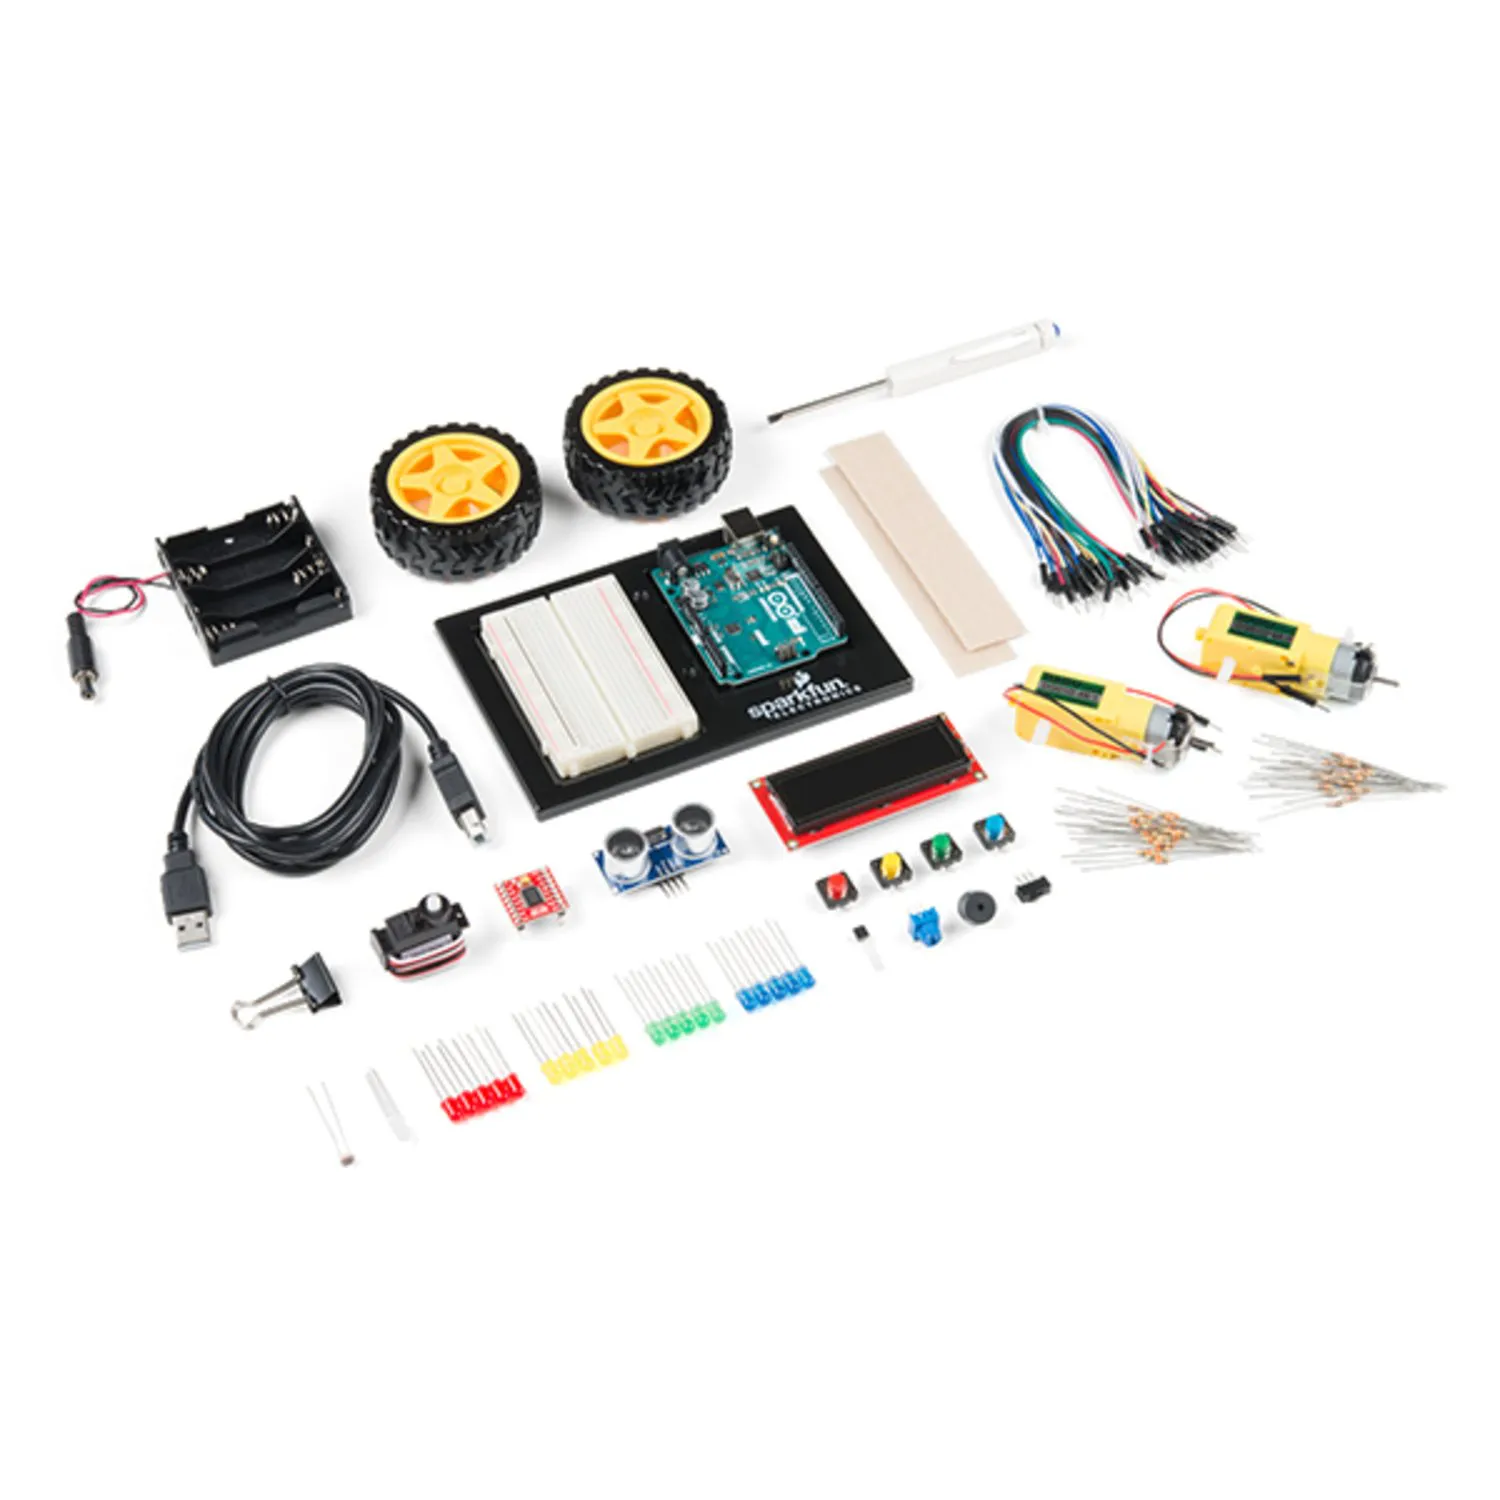 Photo of SparkFun Inventor's Kit for Arduino Uno - v4.1